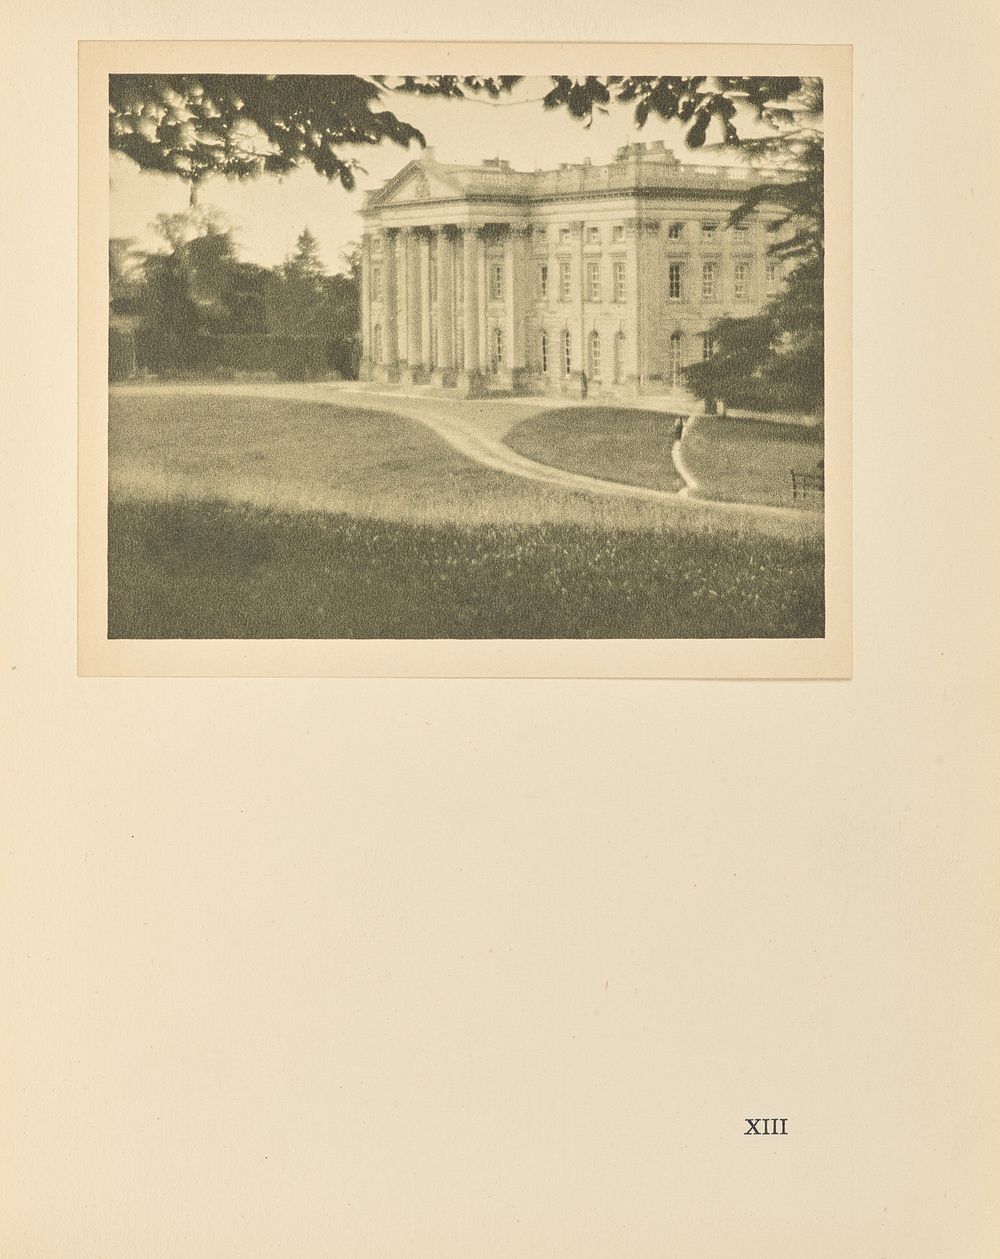 Moor Park From The South by Alvin Langdon Coburn